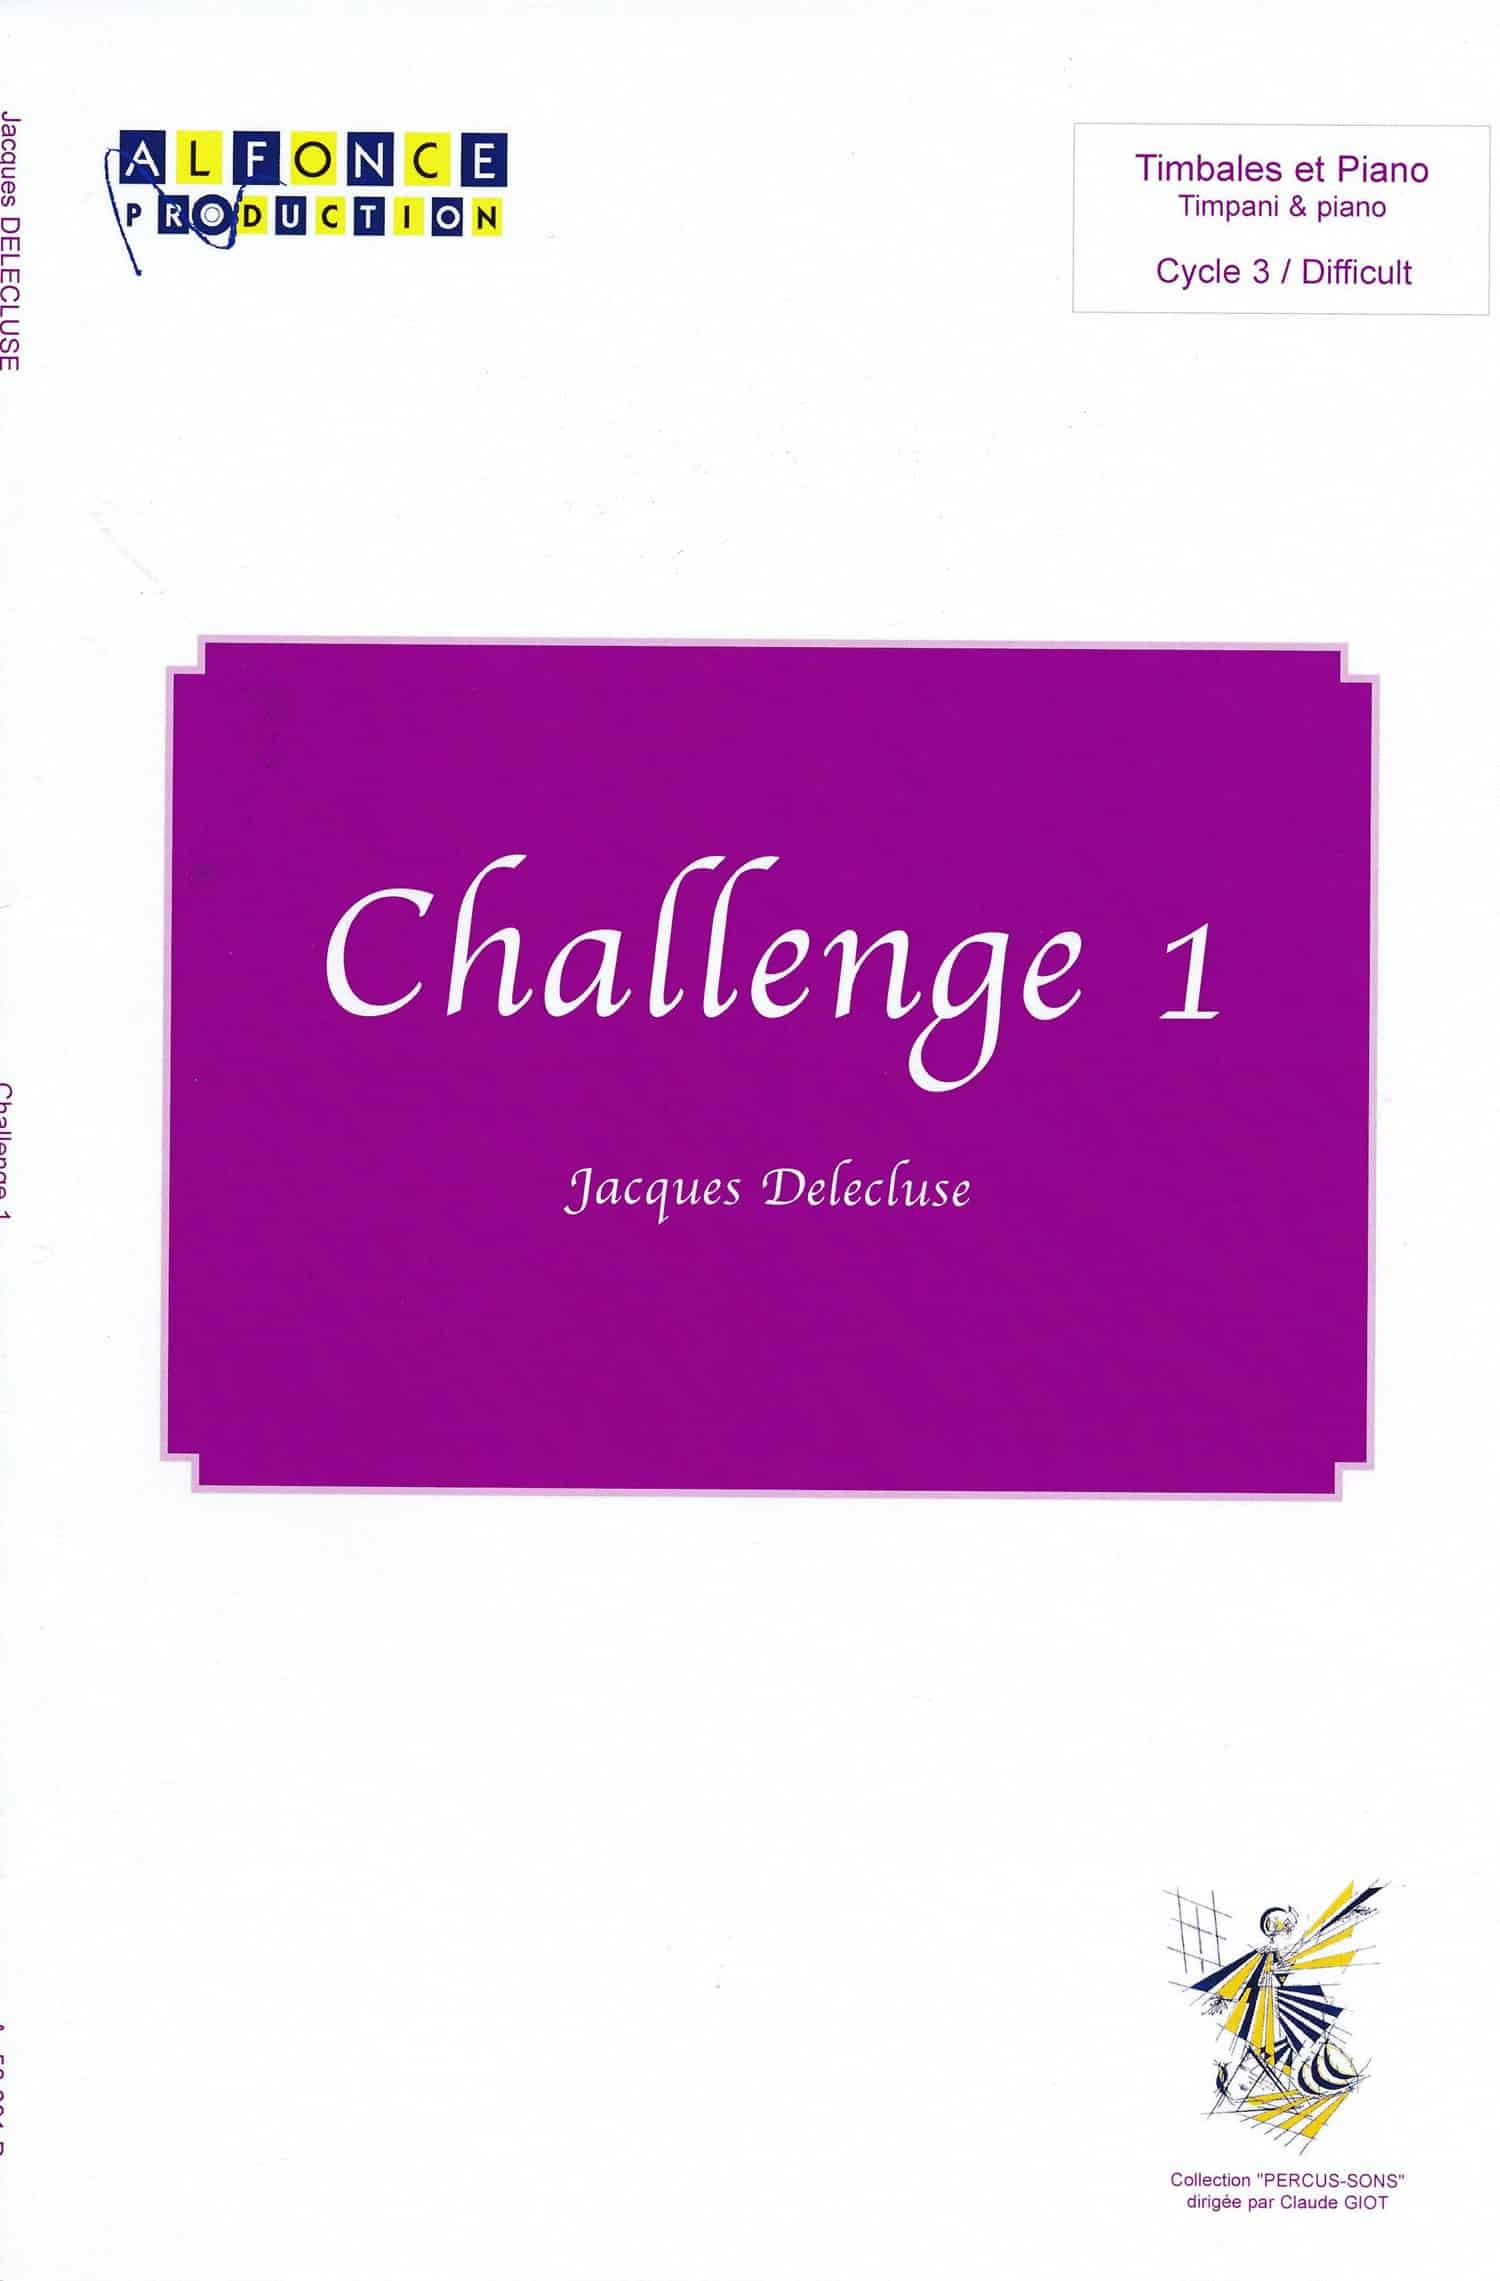 Challenge 1 by Jacques Delecluse